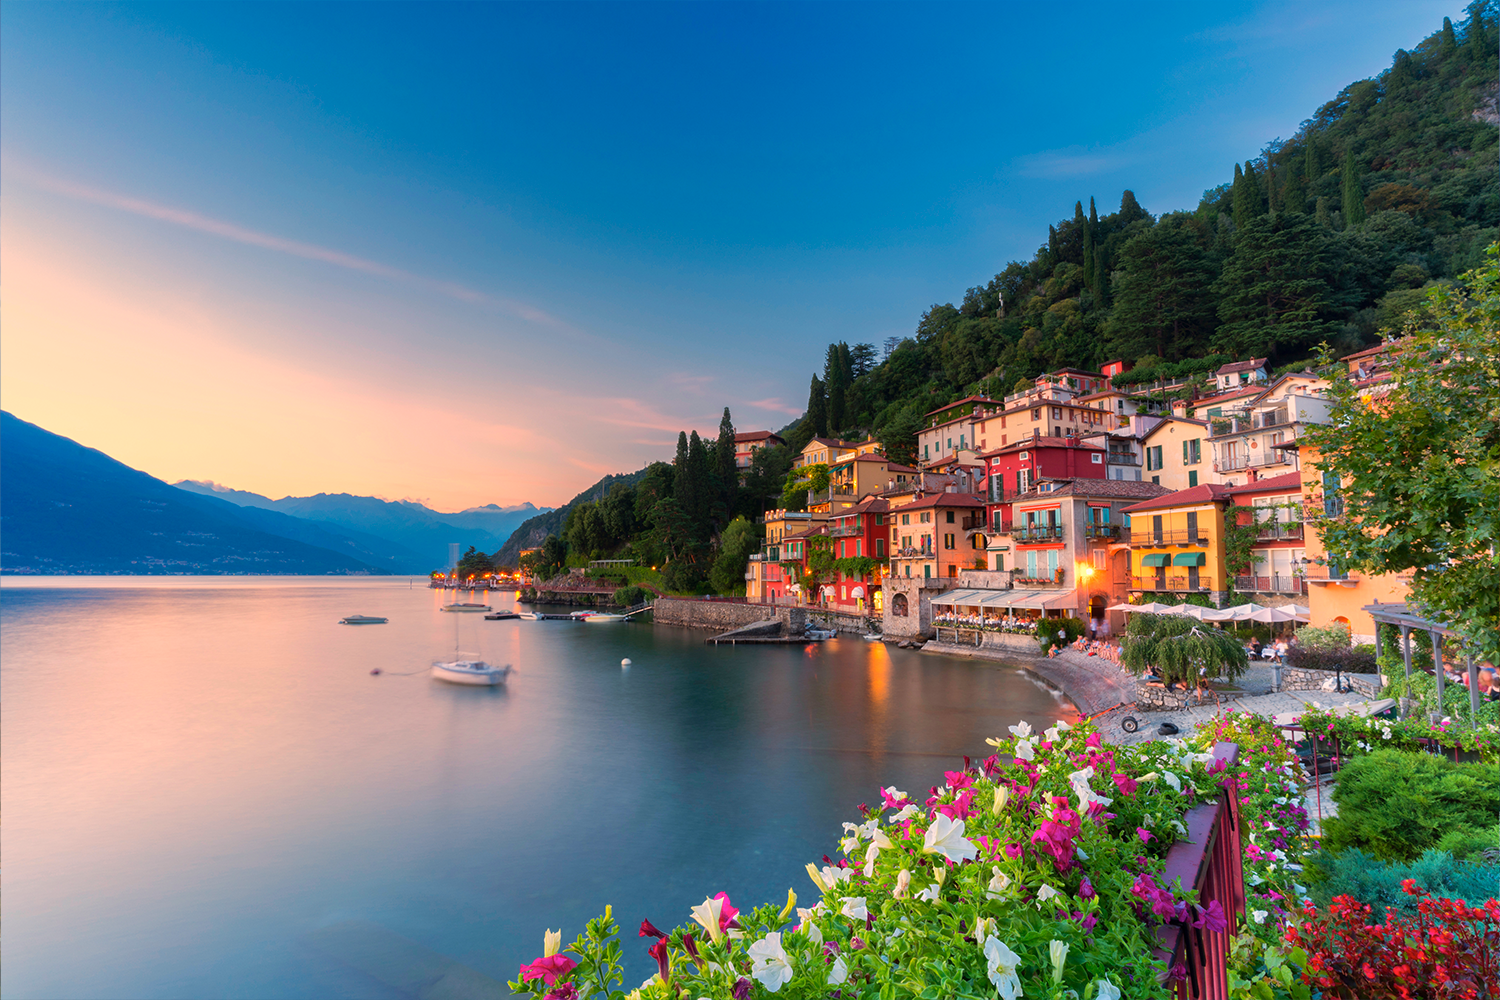 Sunset over the village of Varenna on the shores of Lake Como